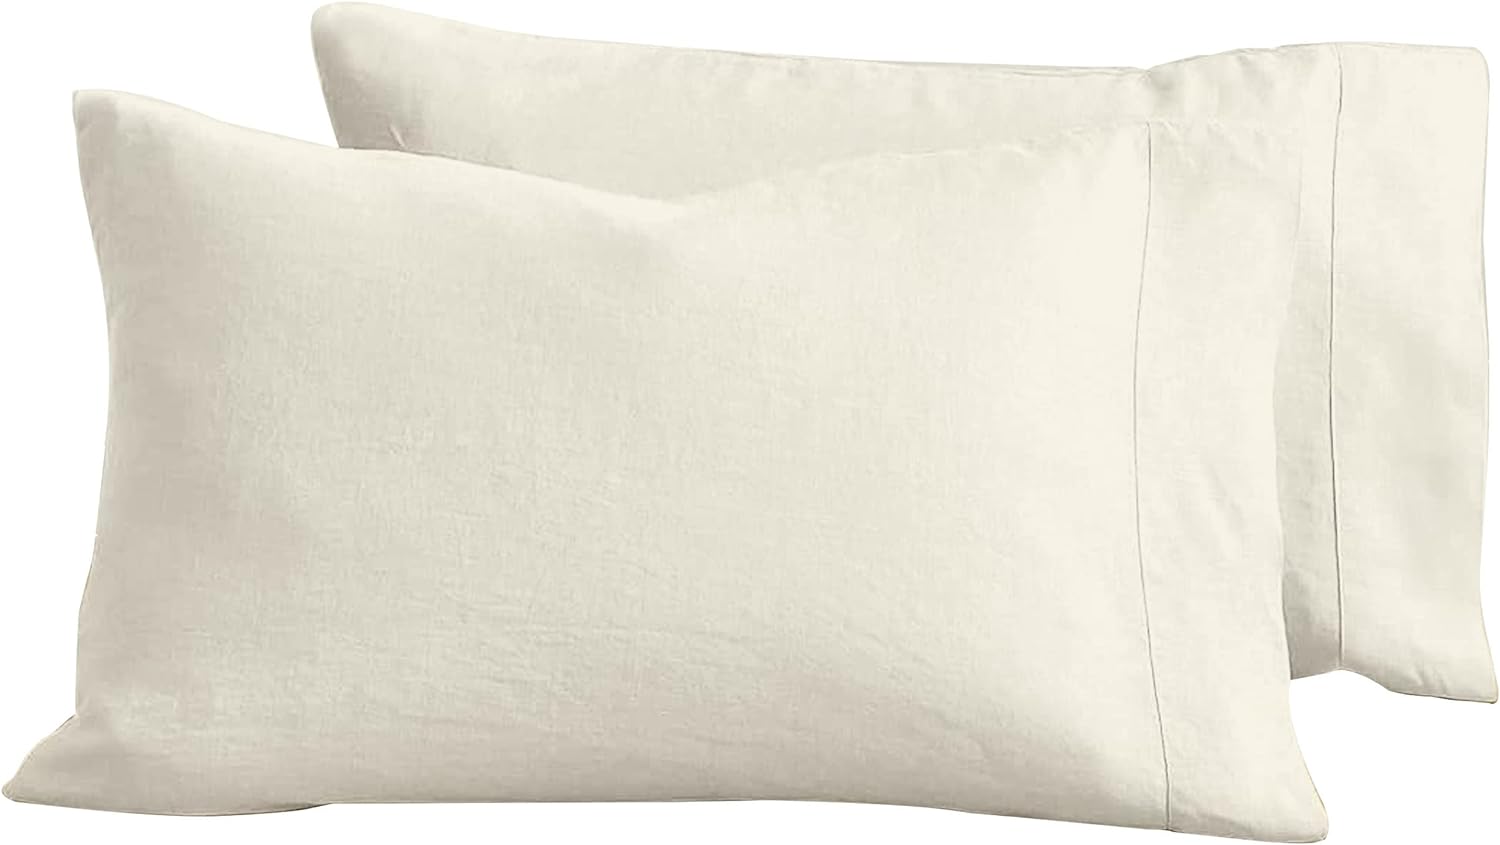 Baloo Linen Pillowcase Set of 2, Pure Natural French Linen, Standard, 20x30 inches, Oatmeal